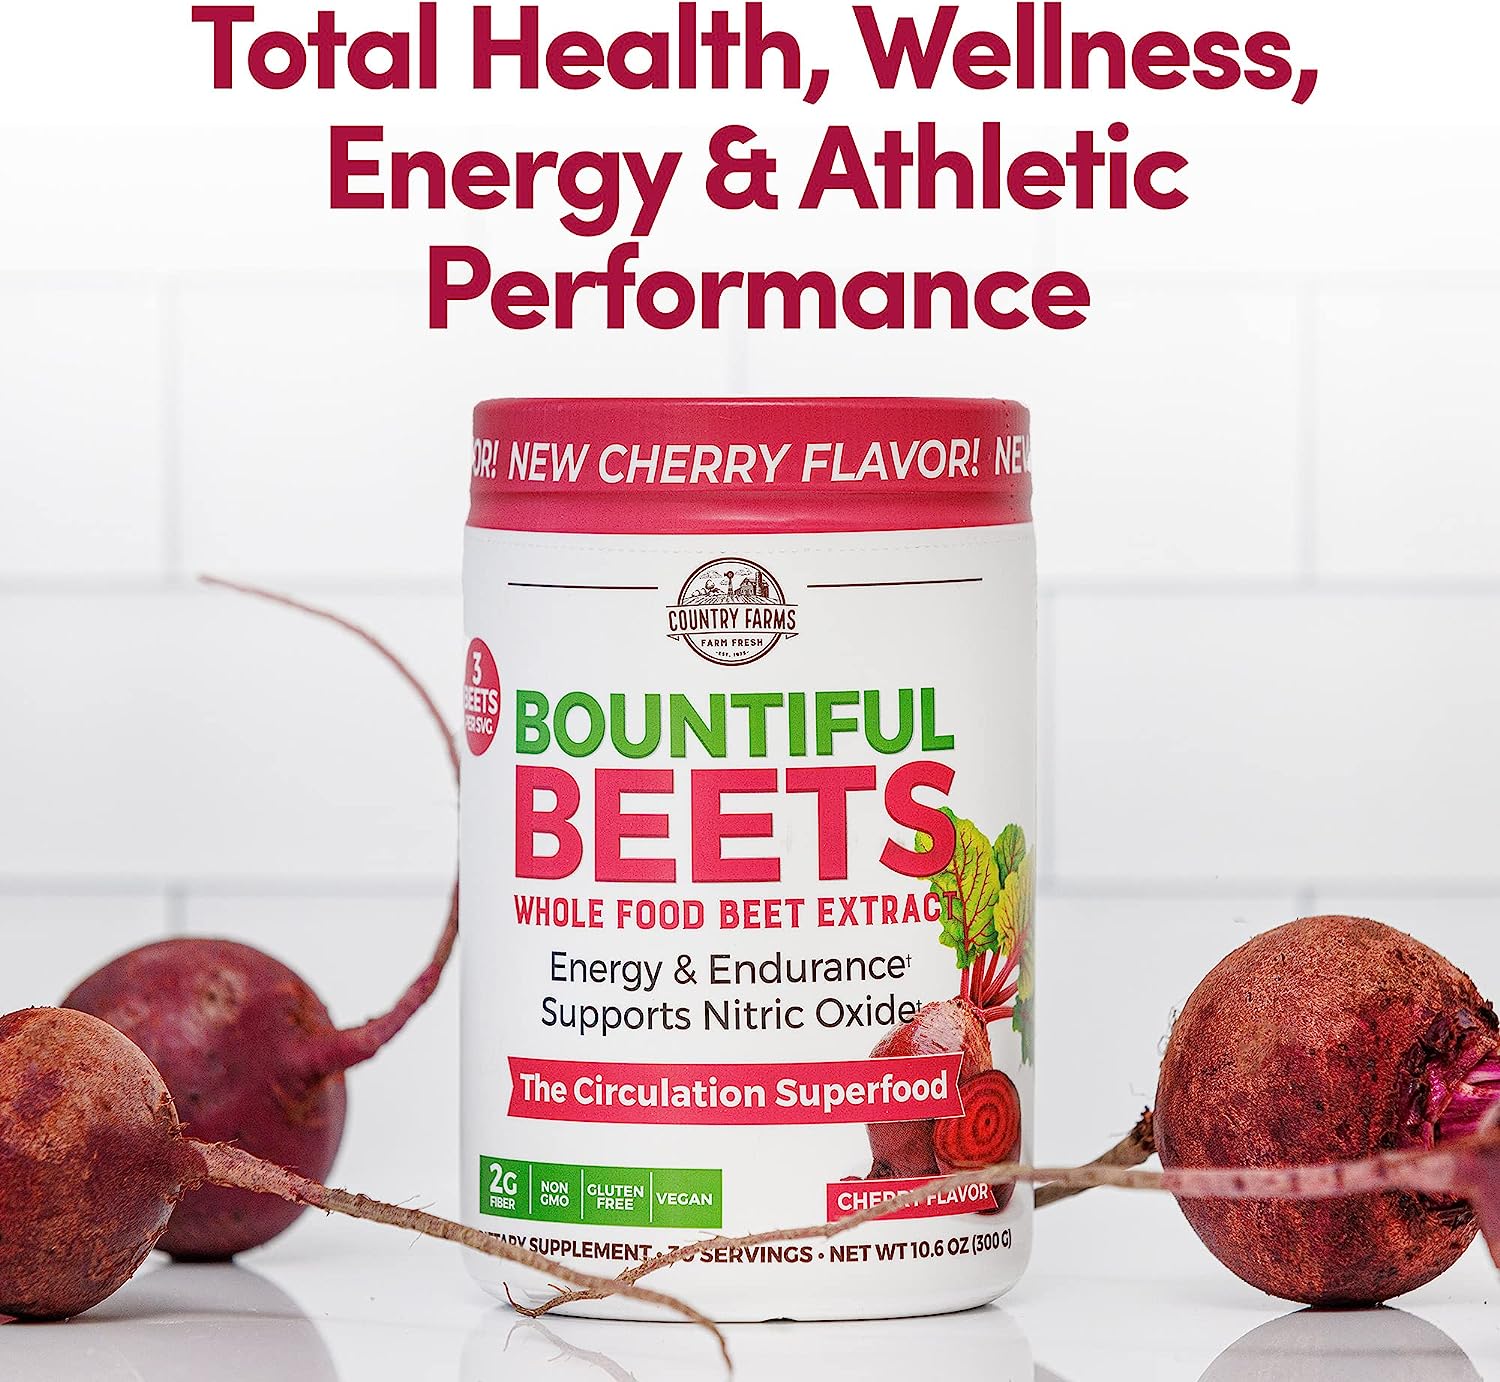 Country Farms Bountiful Beets, Wholefood Beet Extract Superfood, Helps Support Healthy Circulation And Promote Energy, Nitric Oxide Boost, Super Beets, Cherry Flavor, 30 Servings-Stumbit Health